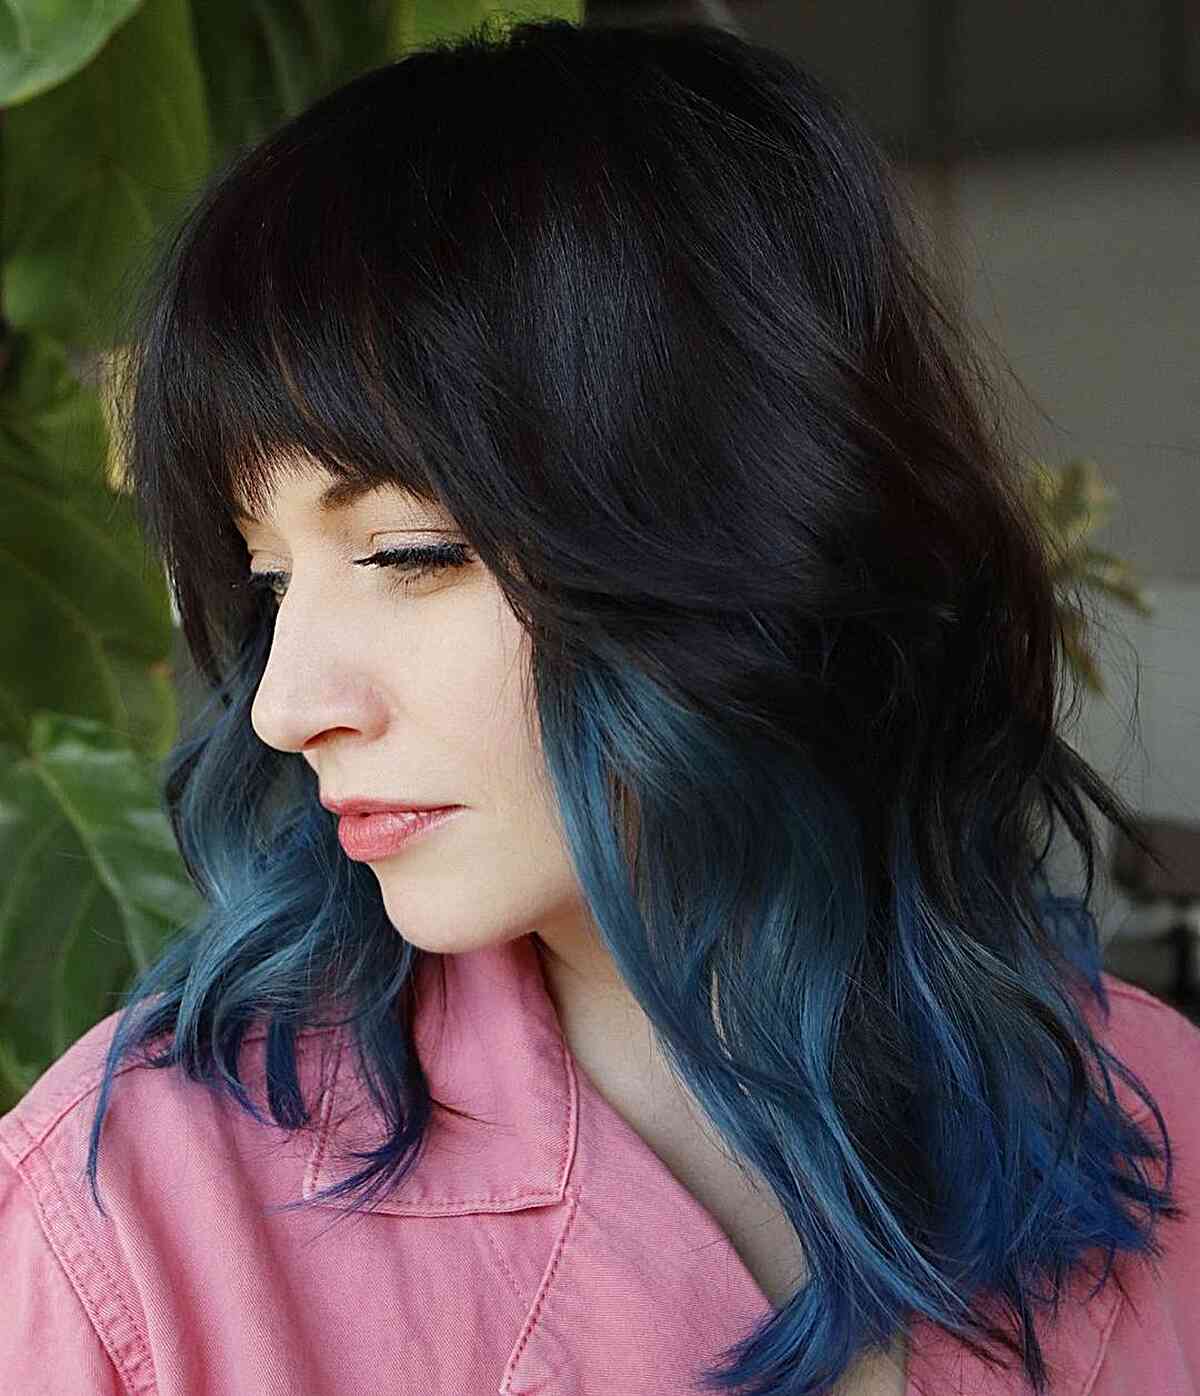 18 Stunning Midnight Blue Hair Colors to See in 2023